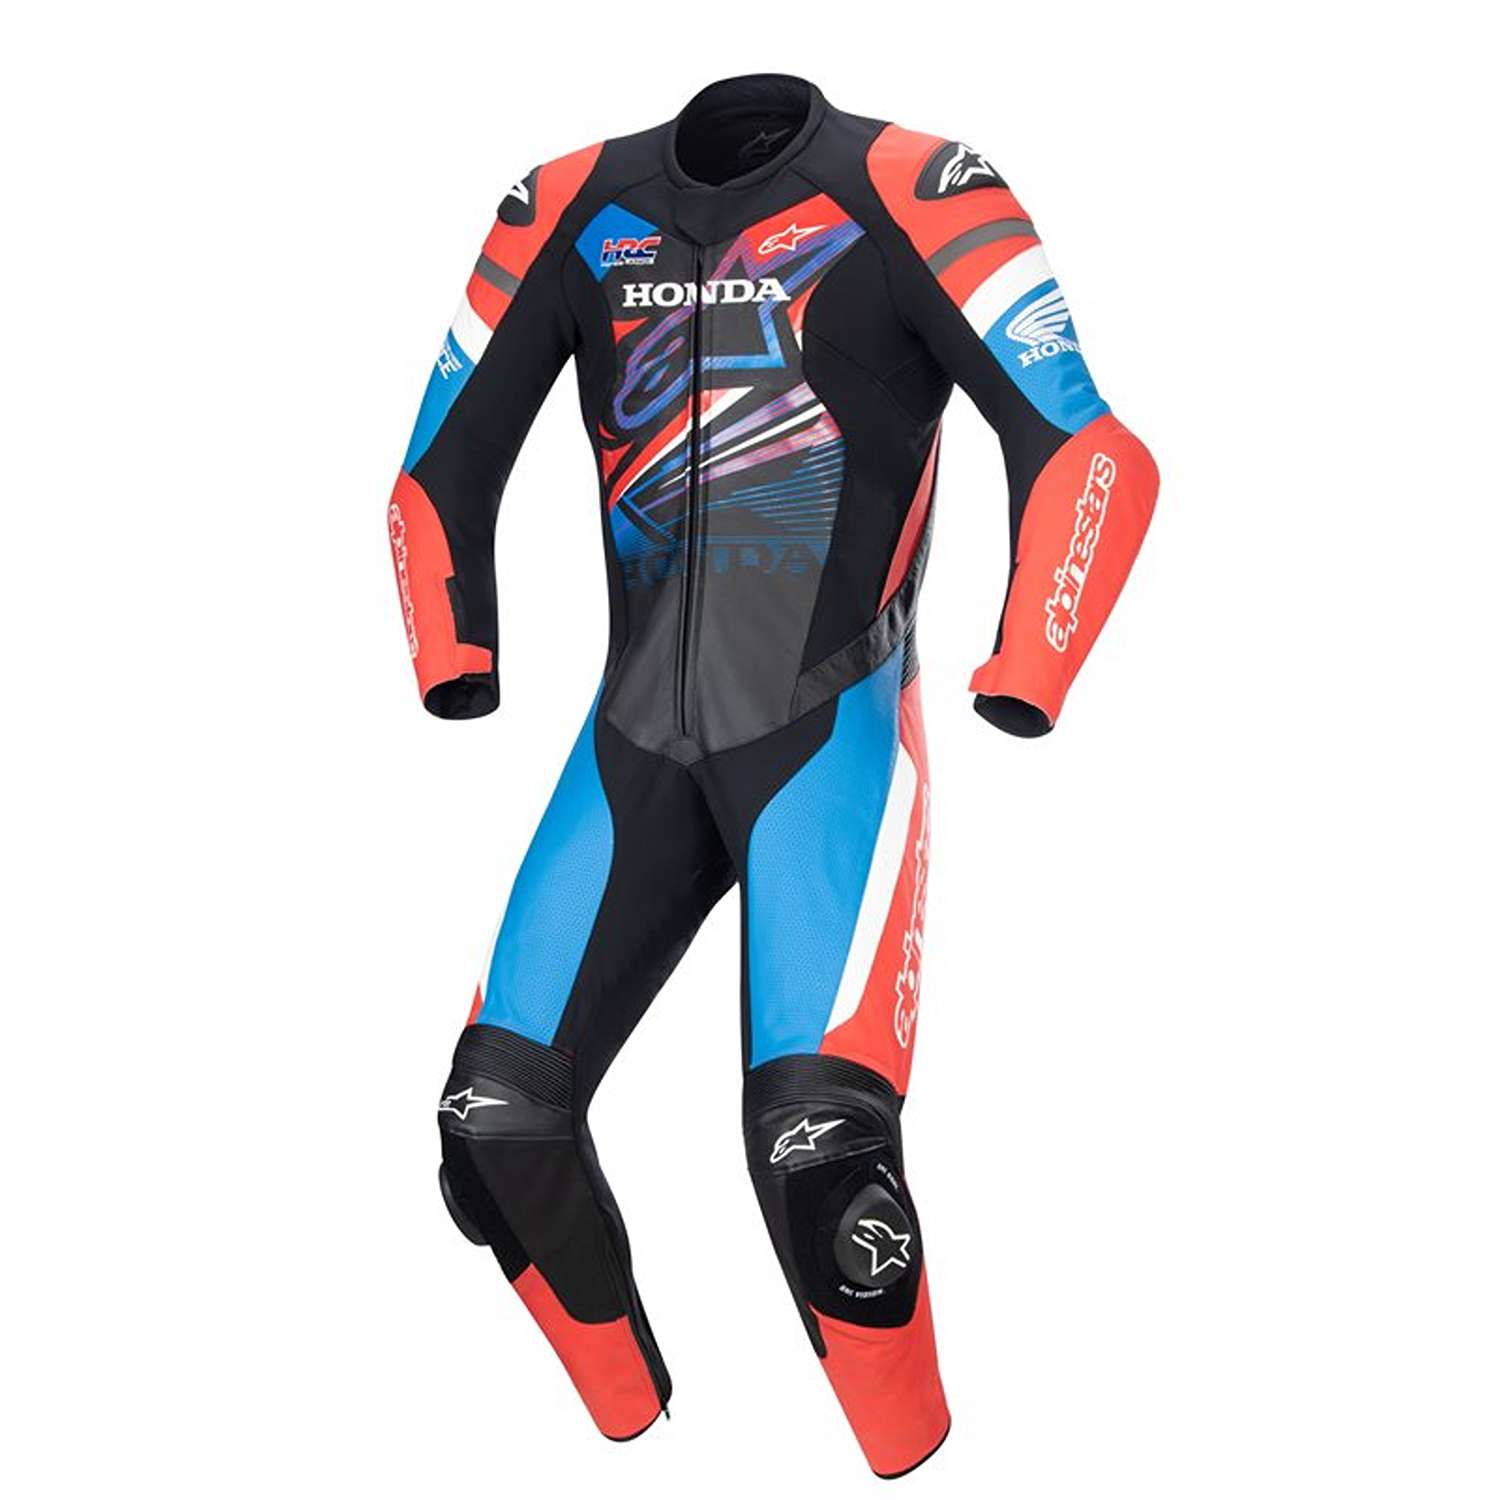 Image of Alpinestars Honda Gp Force Leather Suit Black Bright Red Blue Size 50 ID 8059347160290